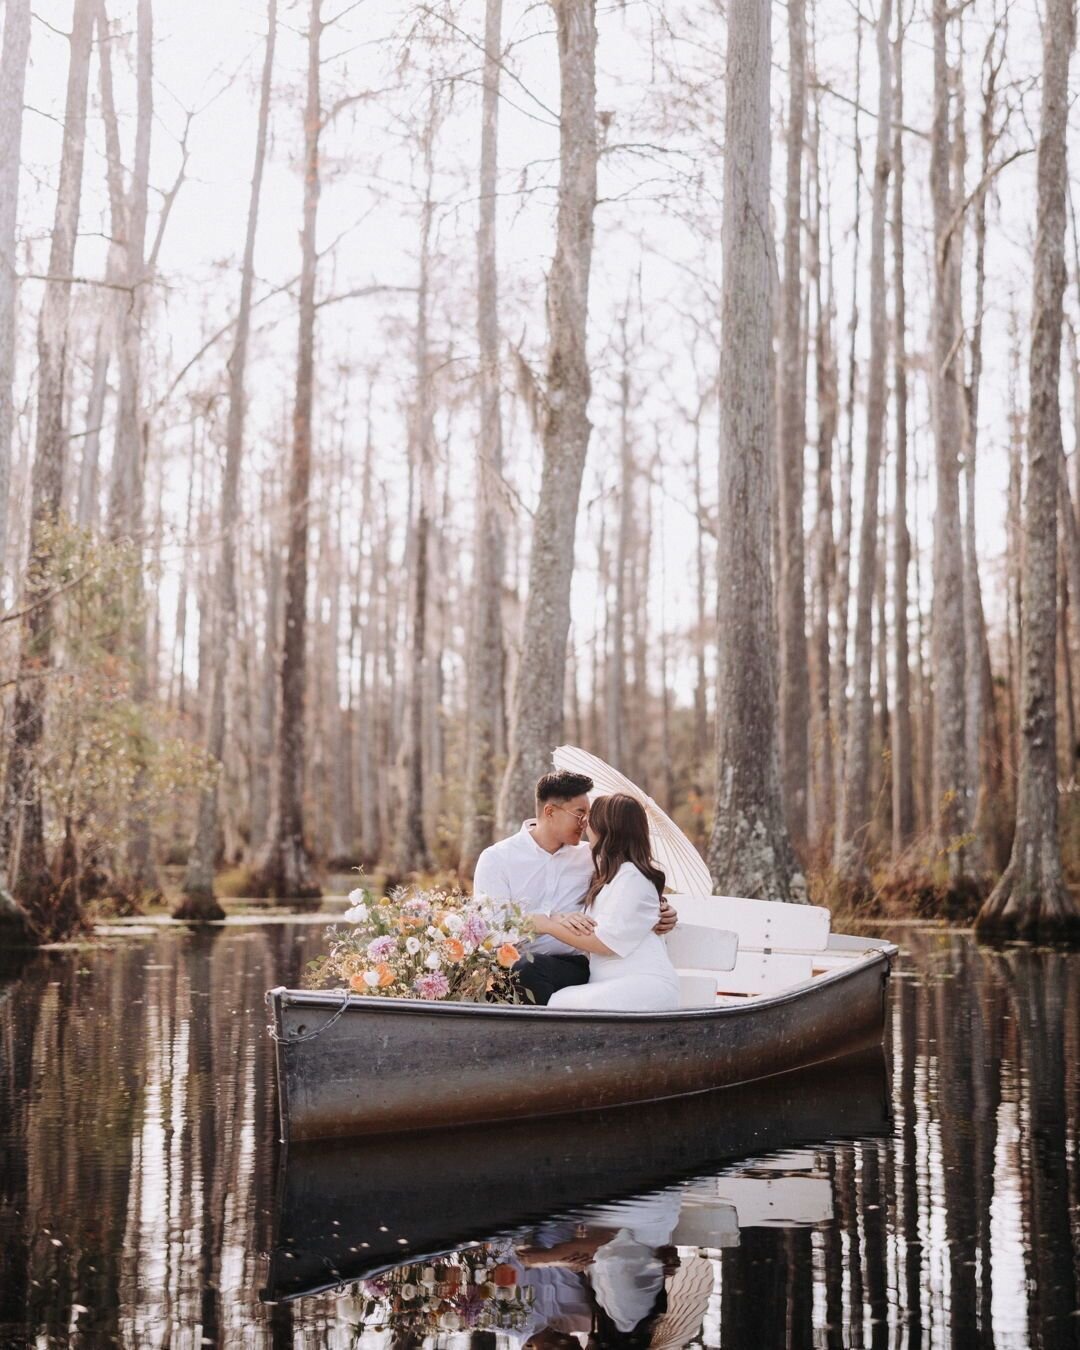 Eugene and Mimi was looking so cute during their boat ride session😍 Shout out to Mimi for her amazing flower arrangement skills💯